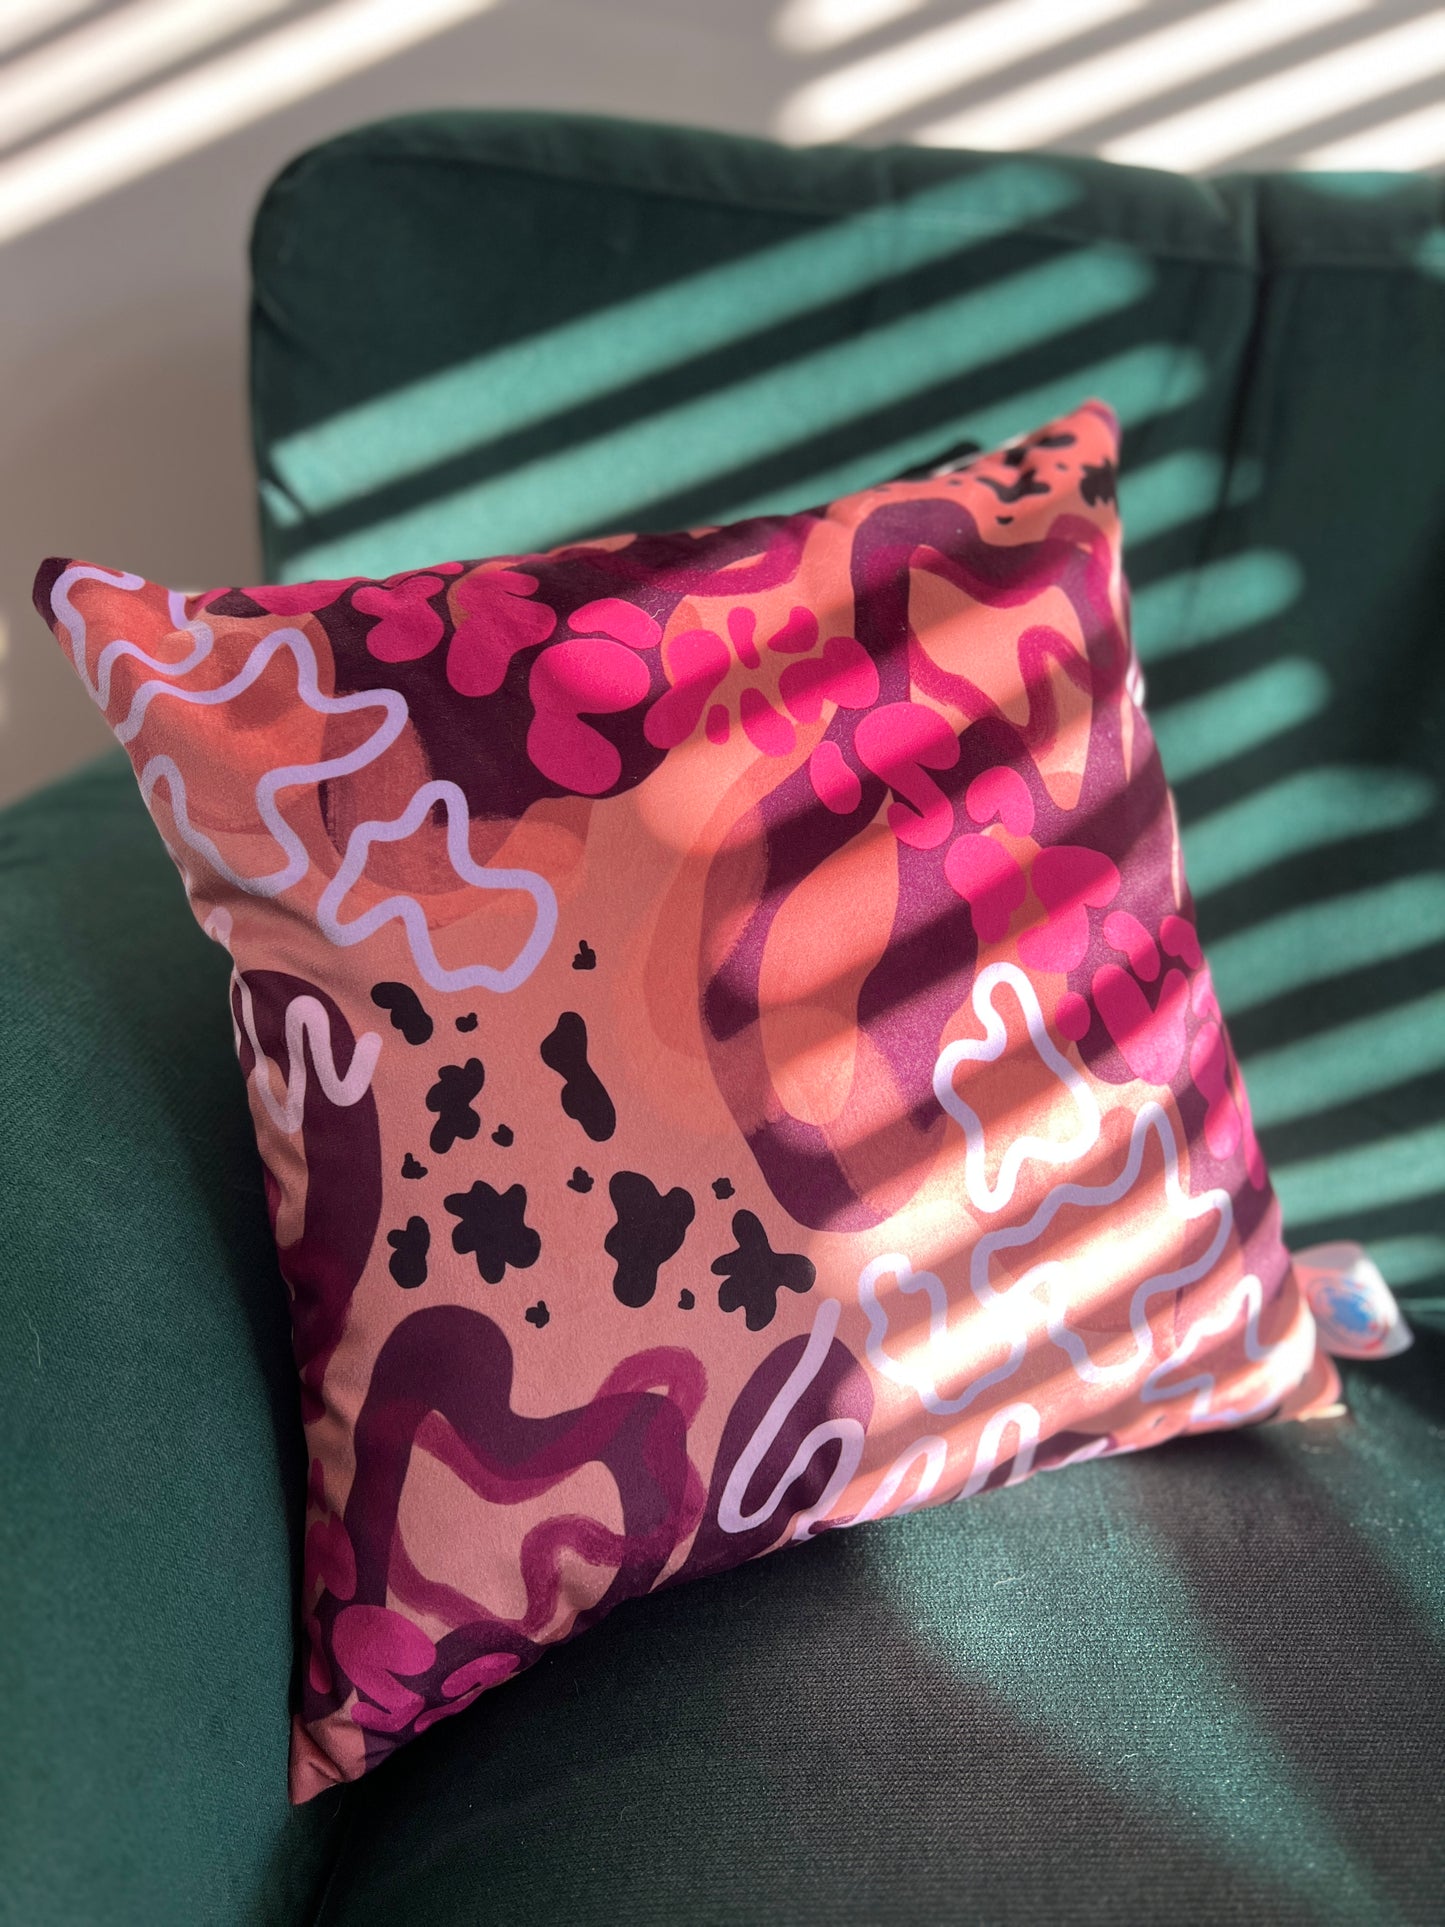 Bands of sunlight across a vibrant cushion featuring abstract shapes of oranges, pinks and purples on a green sofa.